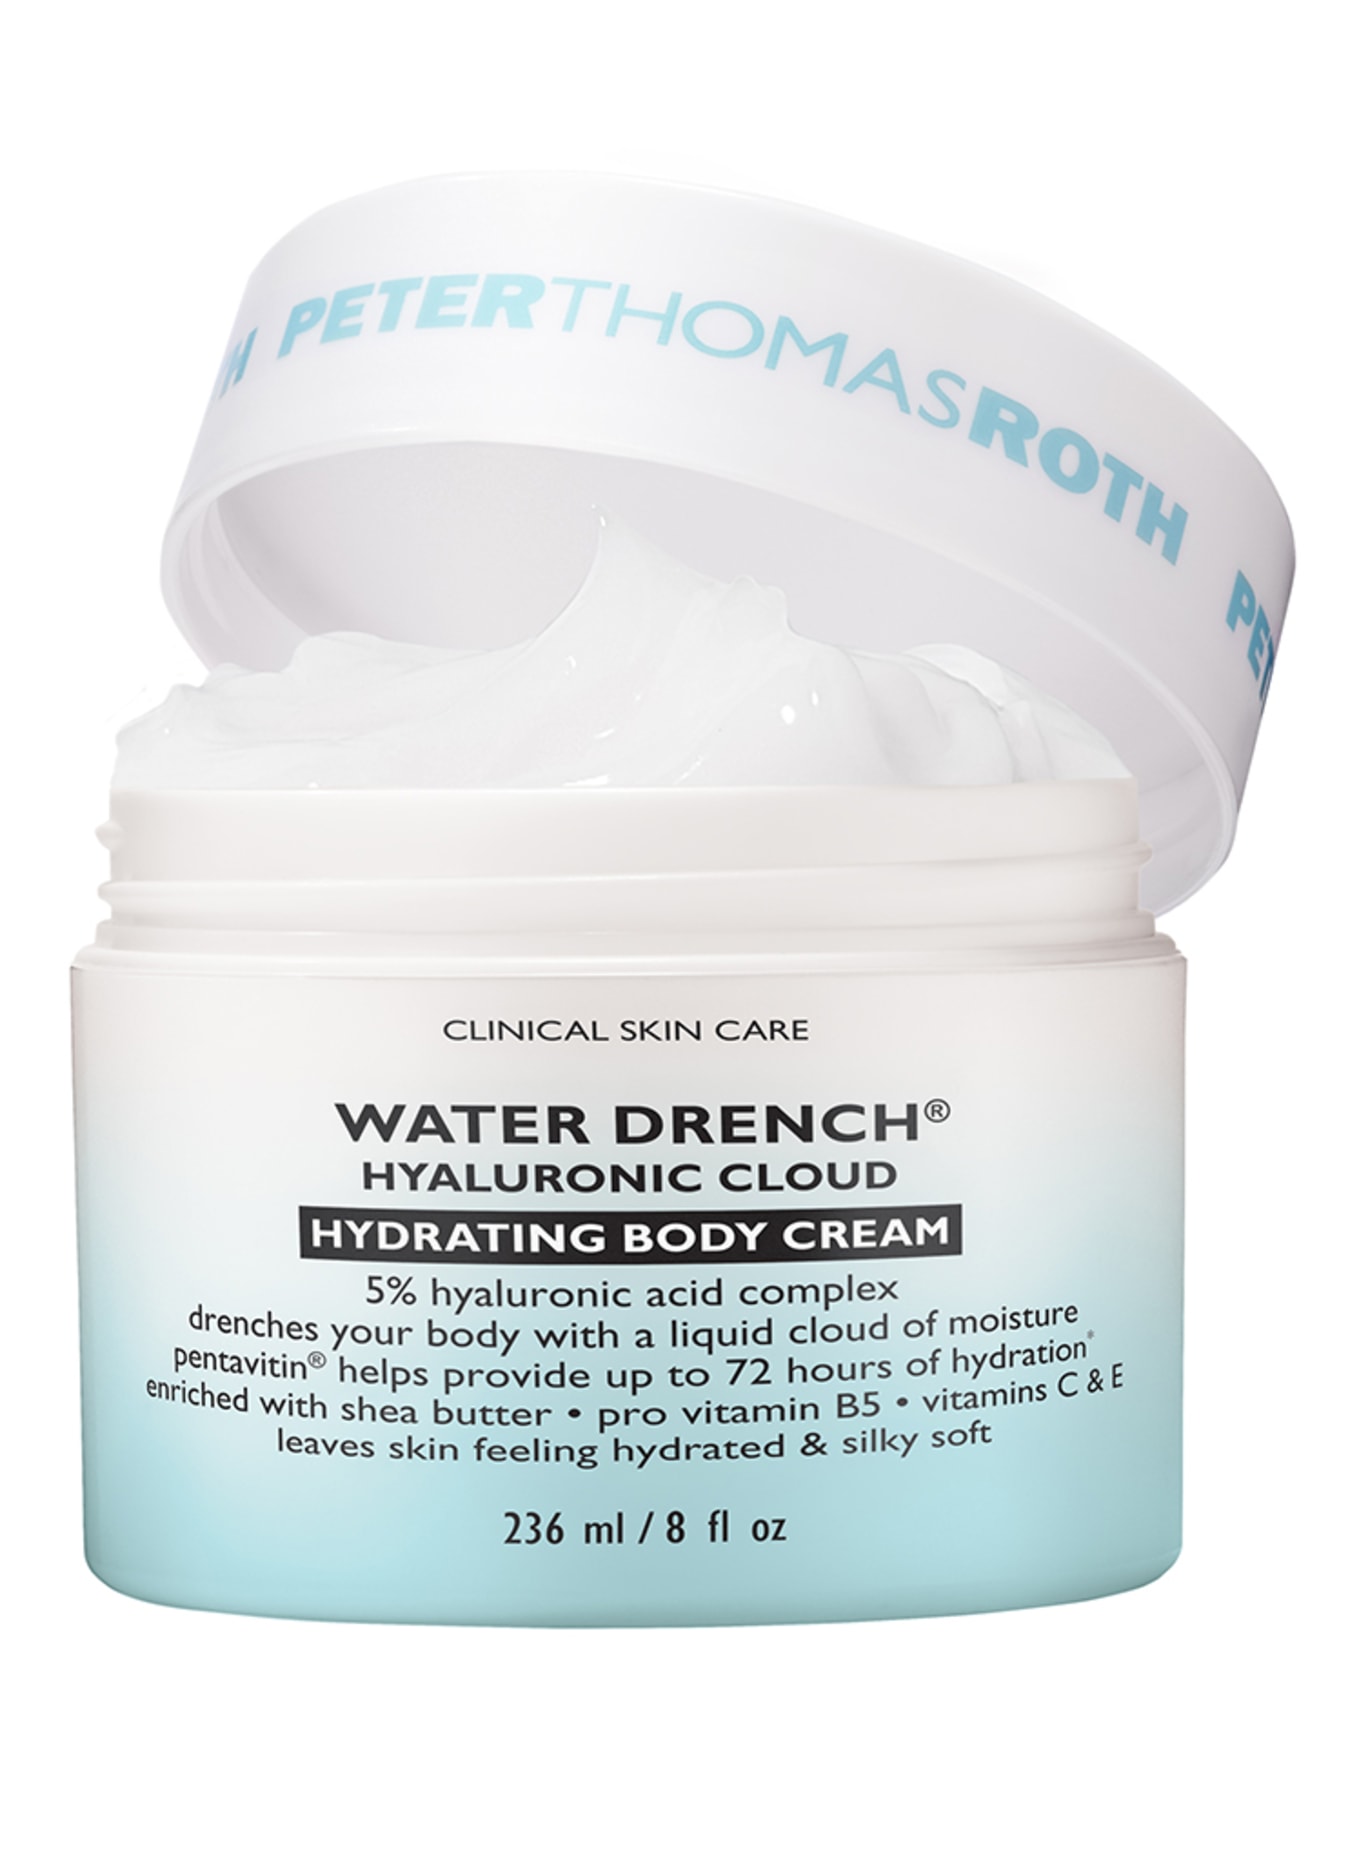 PETER THOMAS ROTH WATER DRENCH® HYALURONIC CLOUD (Bild 2)